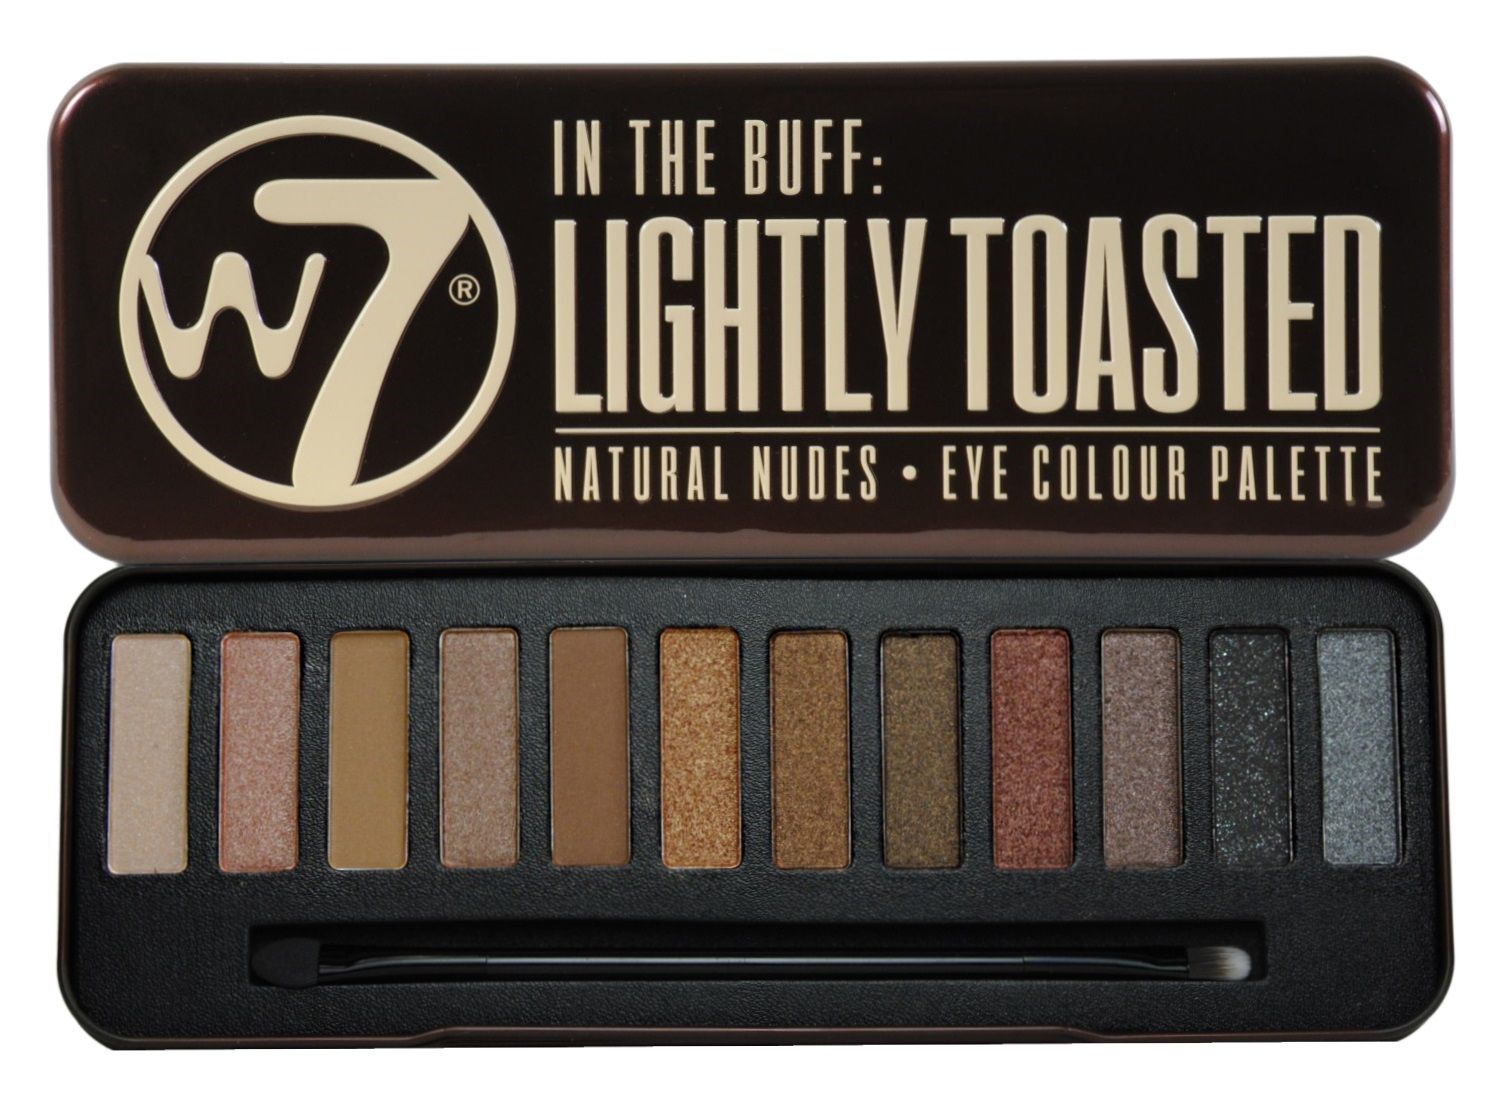 W7 COSMETICS In The Buff Lightly Toasted Eye Colour Palette - ADDROS.COM